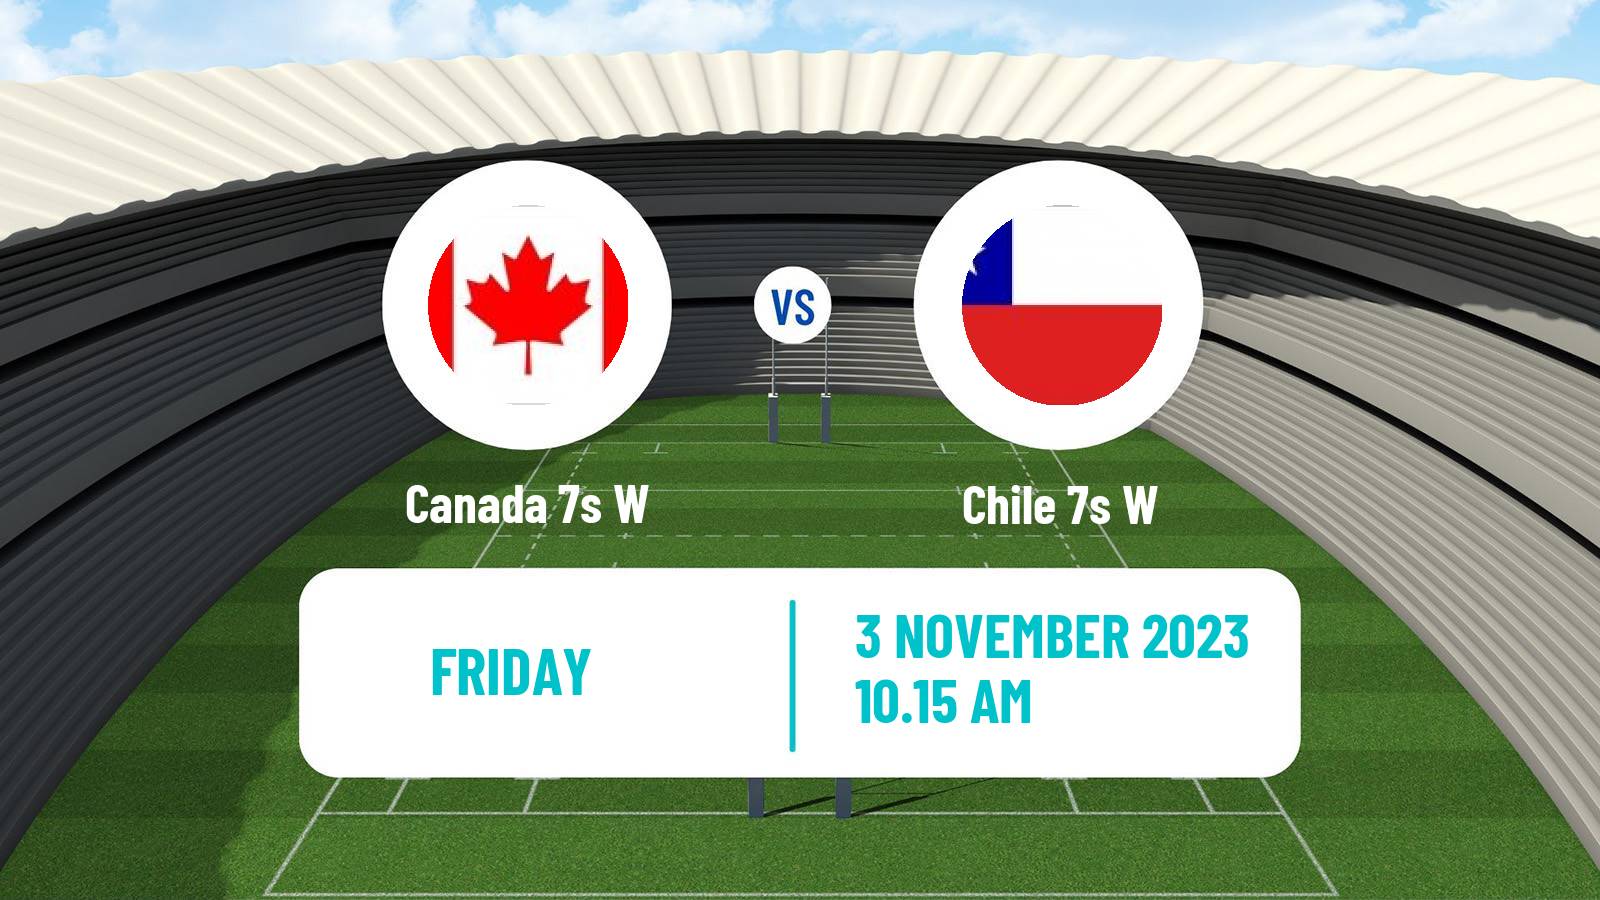 Rugby union Pan American 7s Rugby Women Canada 7s W - Chile 7s W